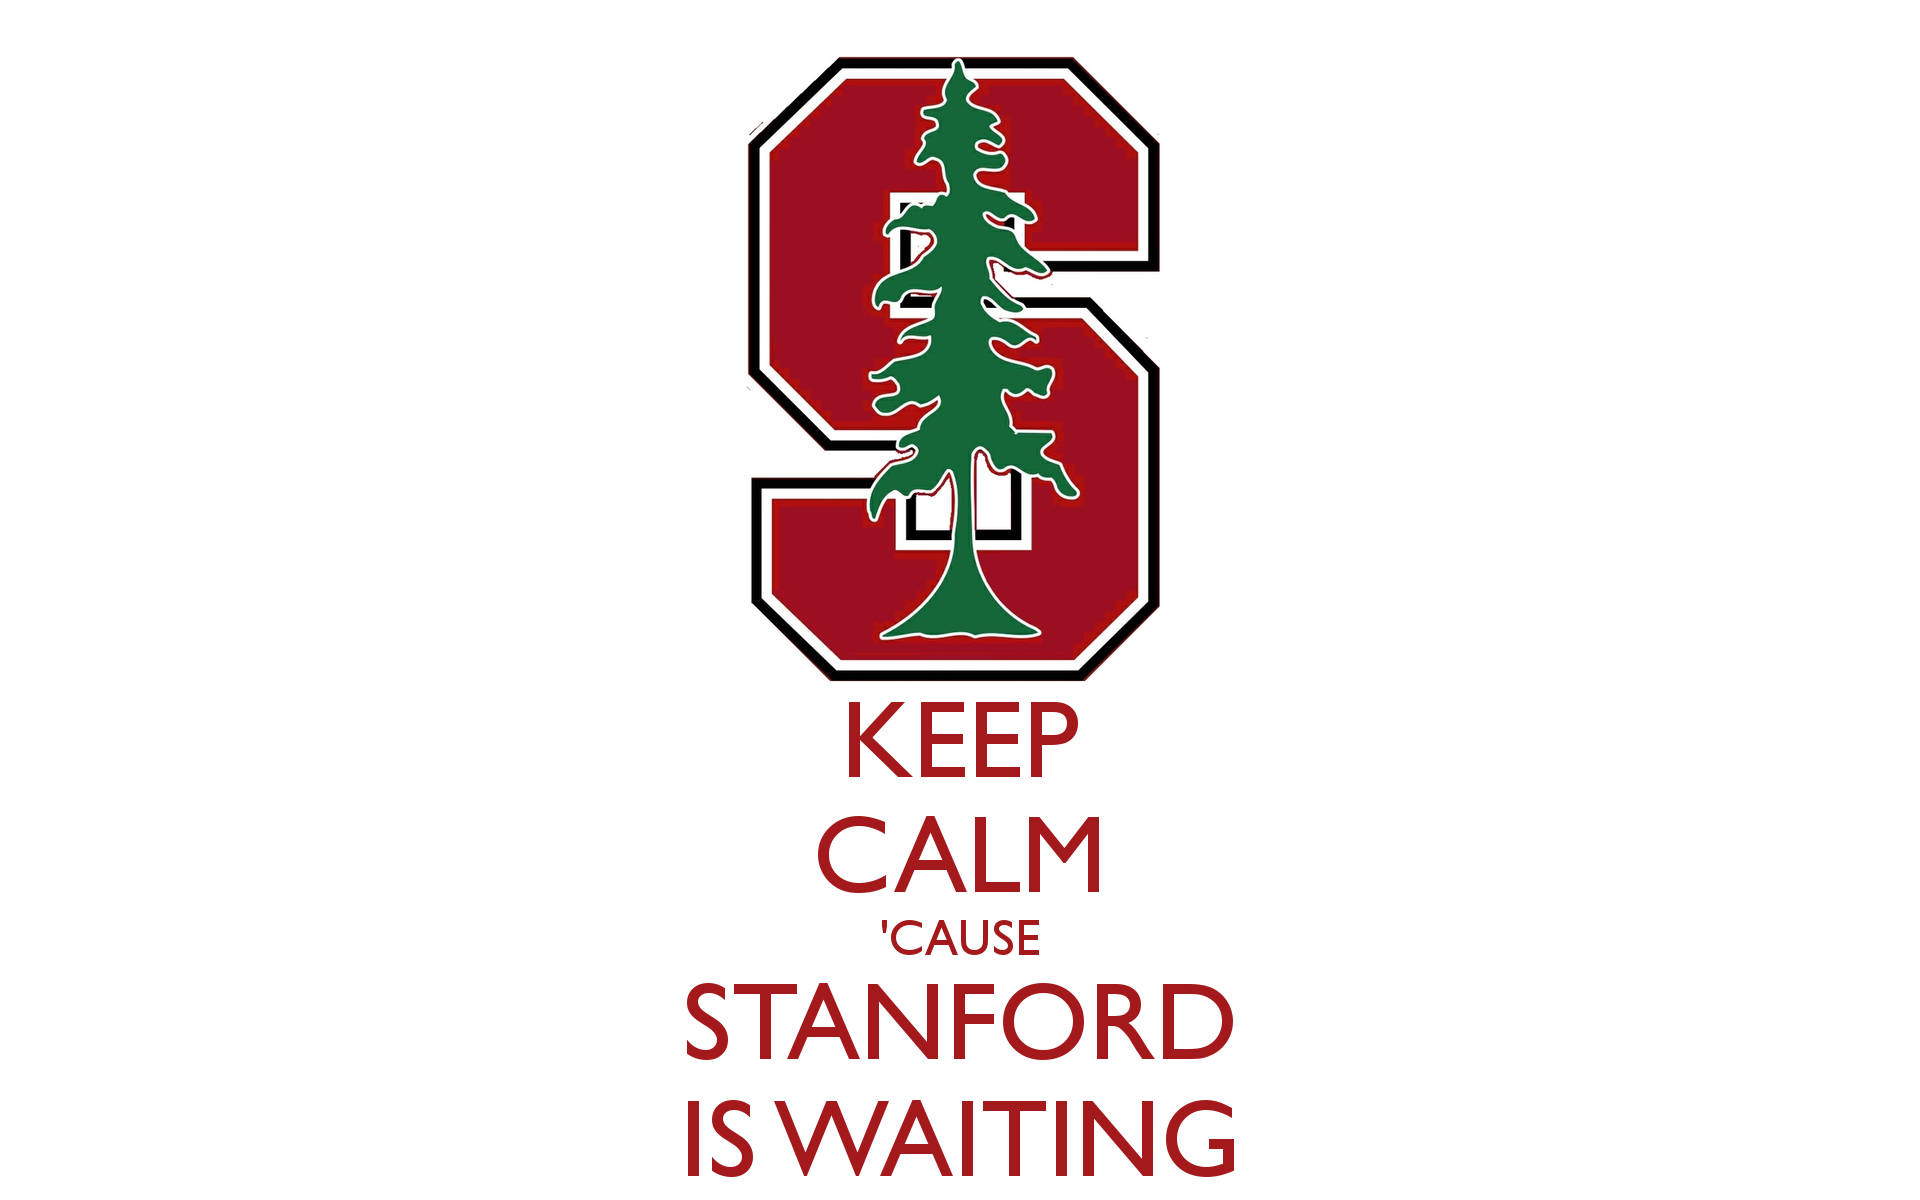 Quote With Stanford University Logo Wallpaper